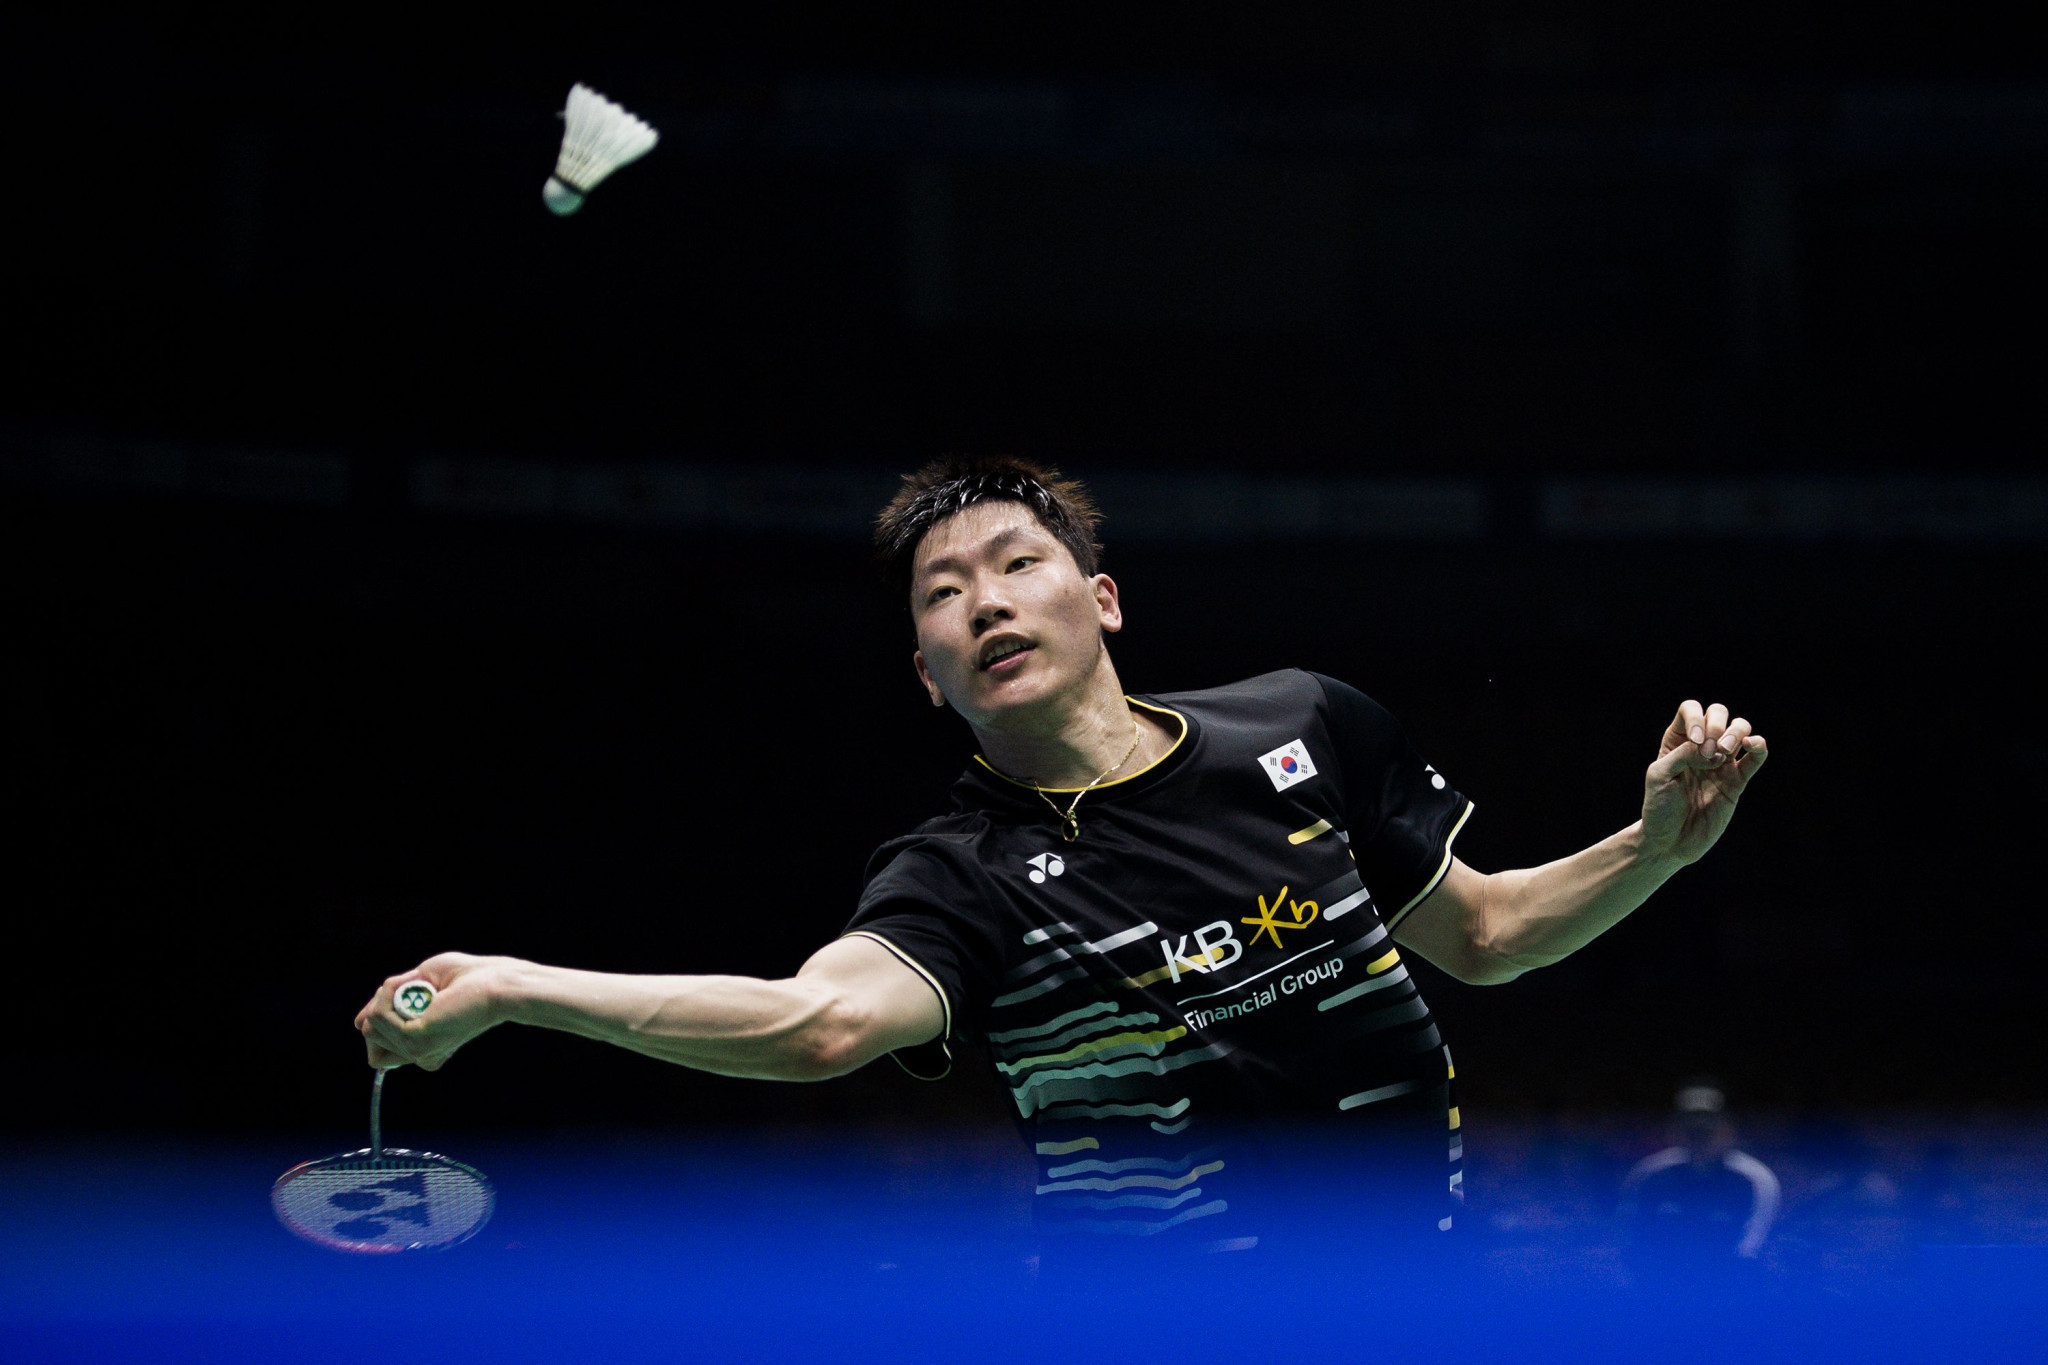 Top men's seed safely through but others dumped out at BWF US Open